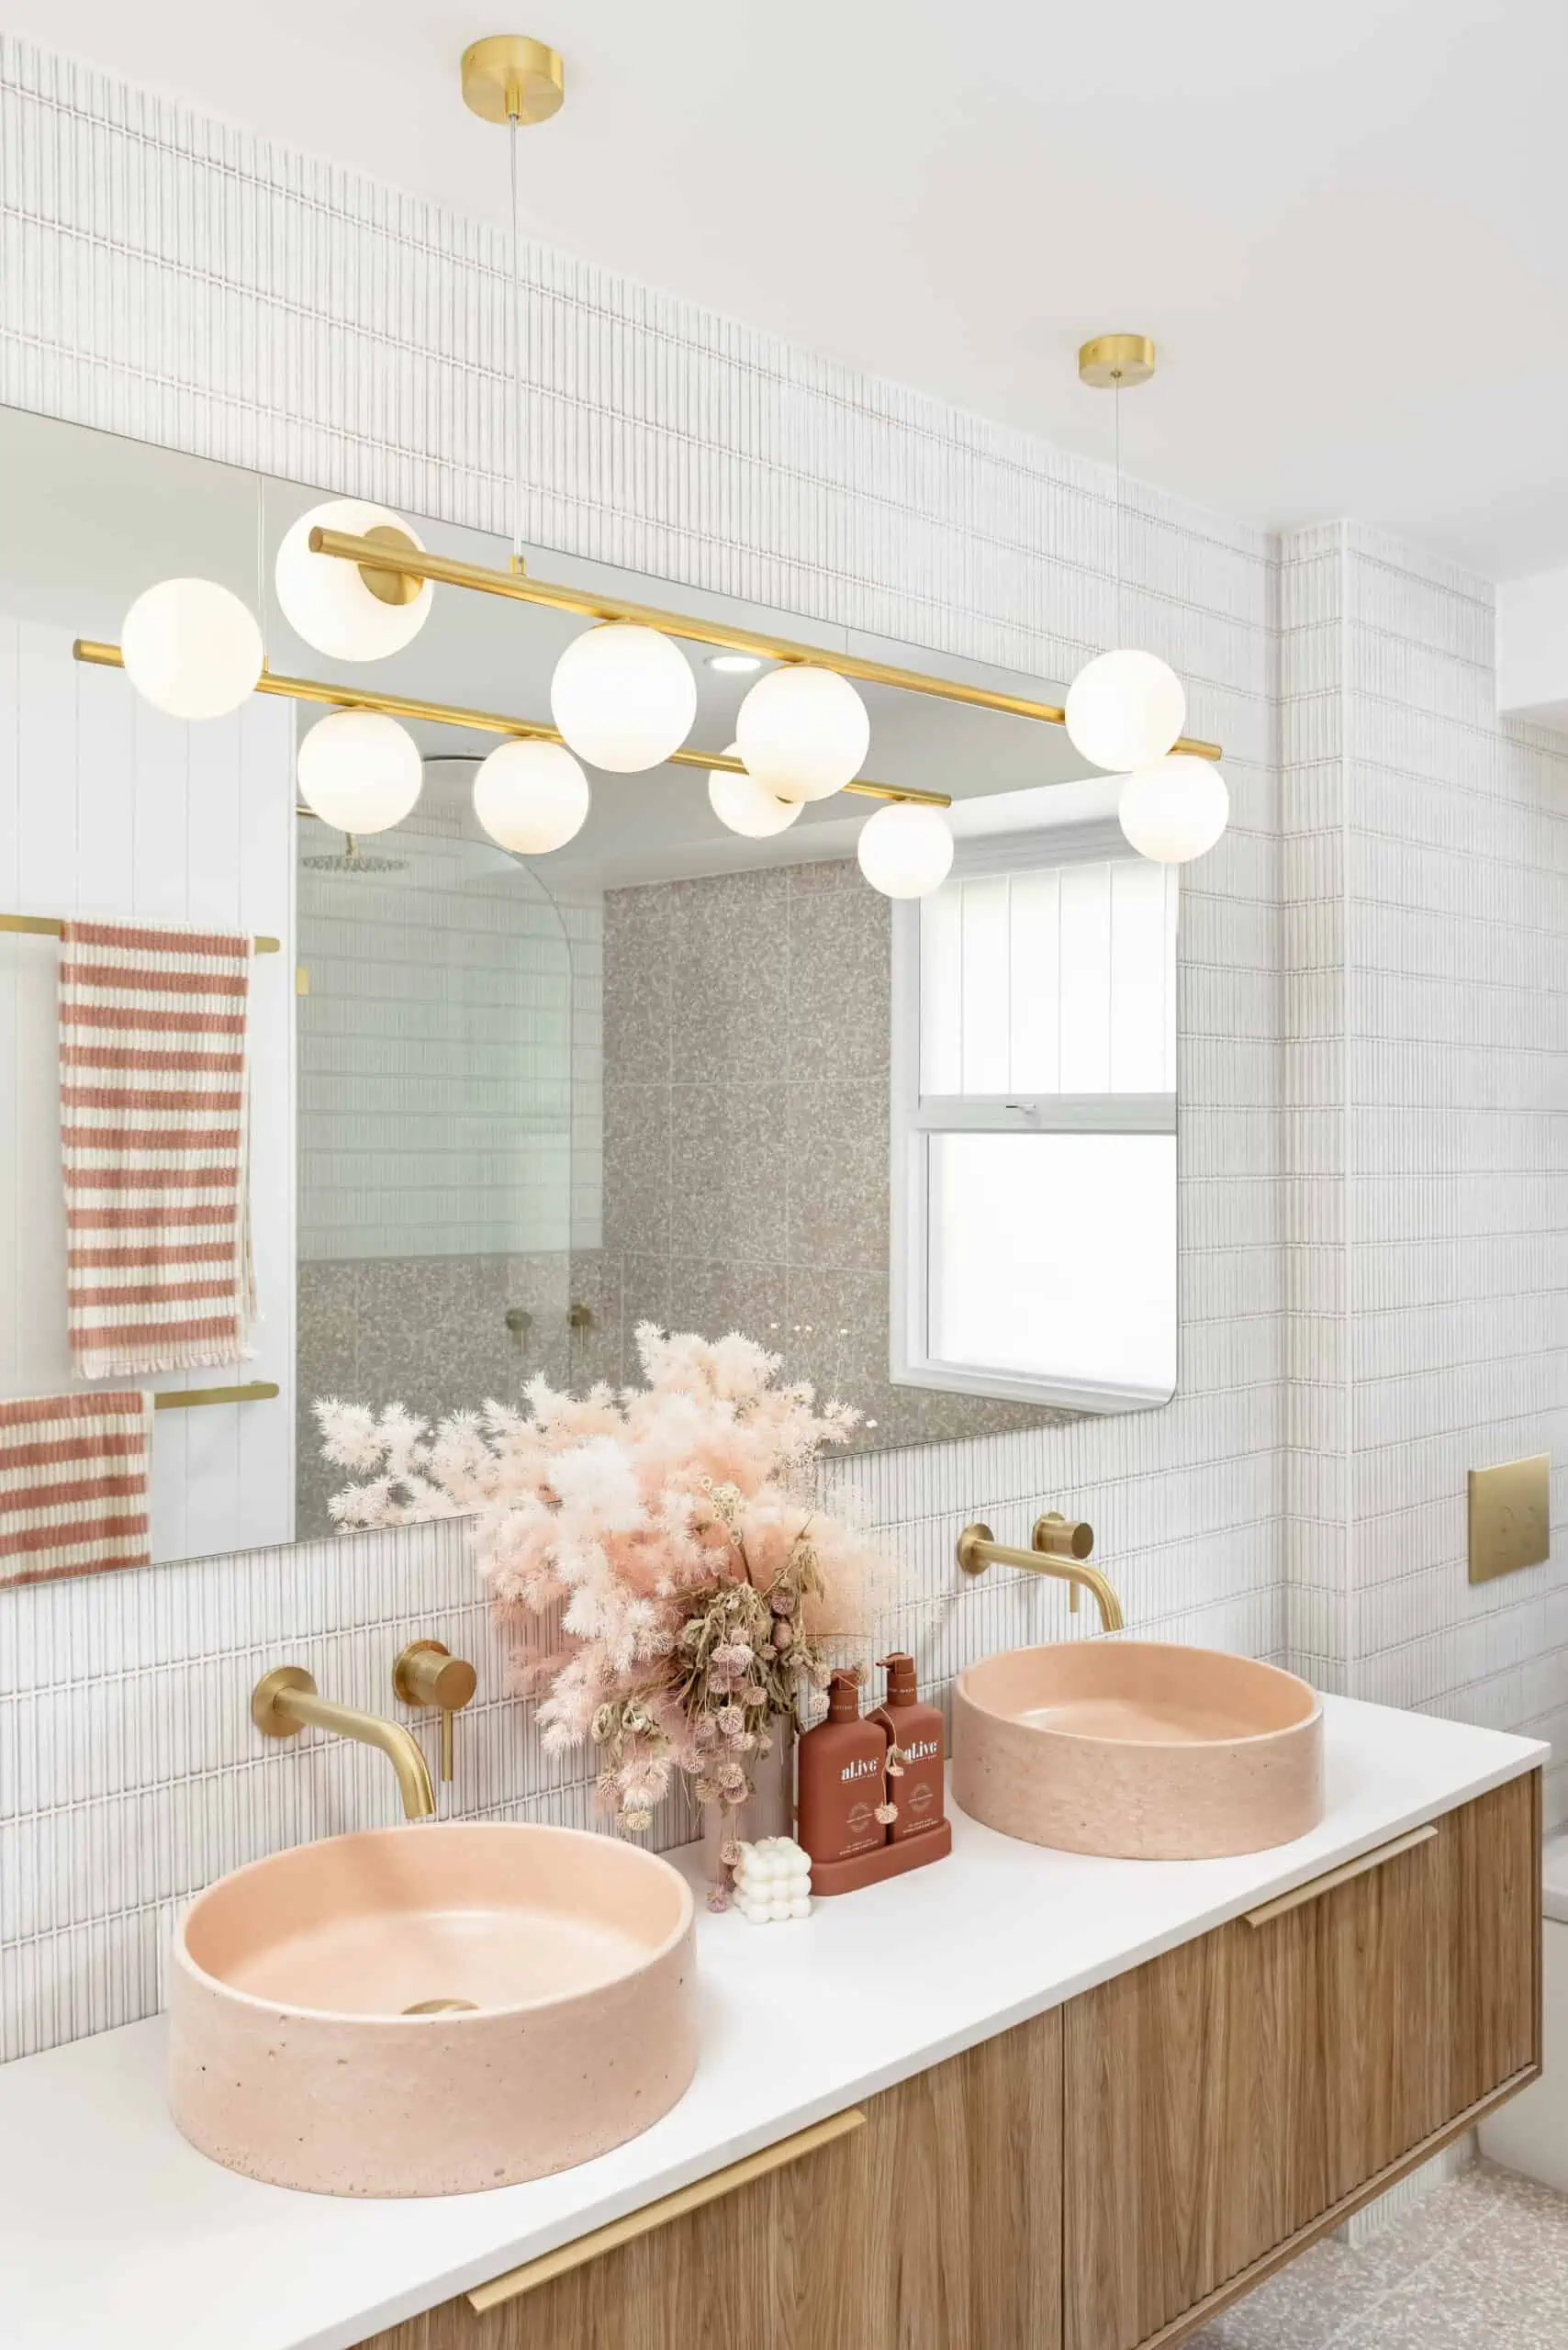 His and hers blush pink sinks on a modern vanity unit in a bathroom renovation